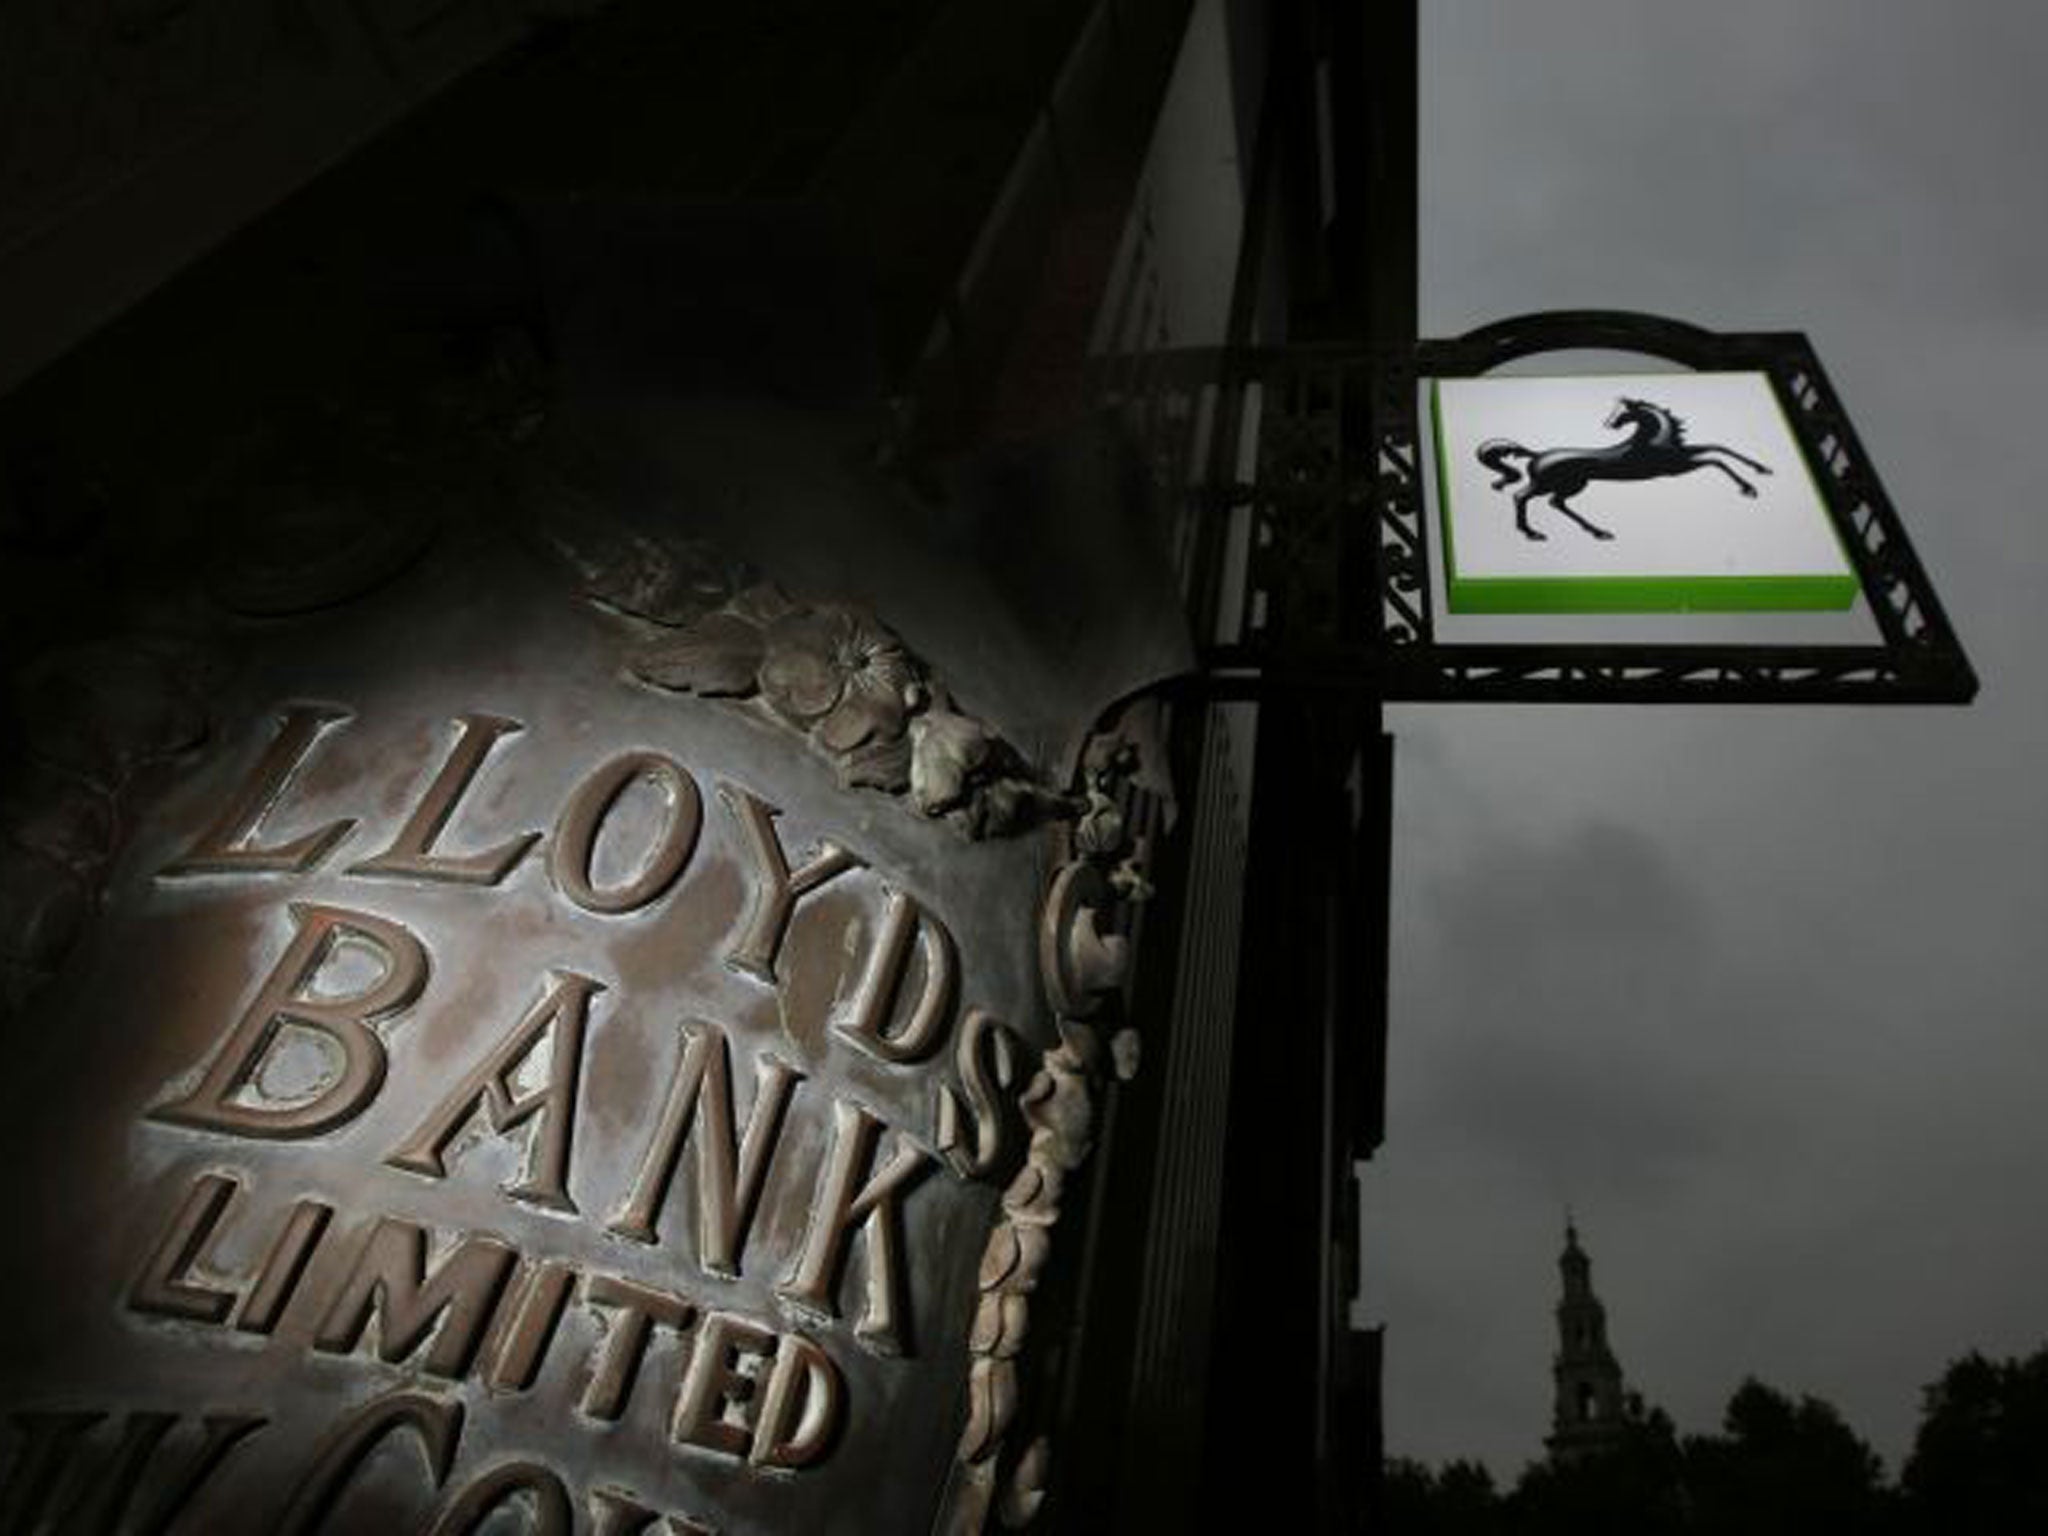 Lloyds Bank was handed a £28m fine – the largest ever imposed on a British bank – for failings in its incentives structure for sales people